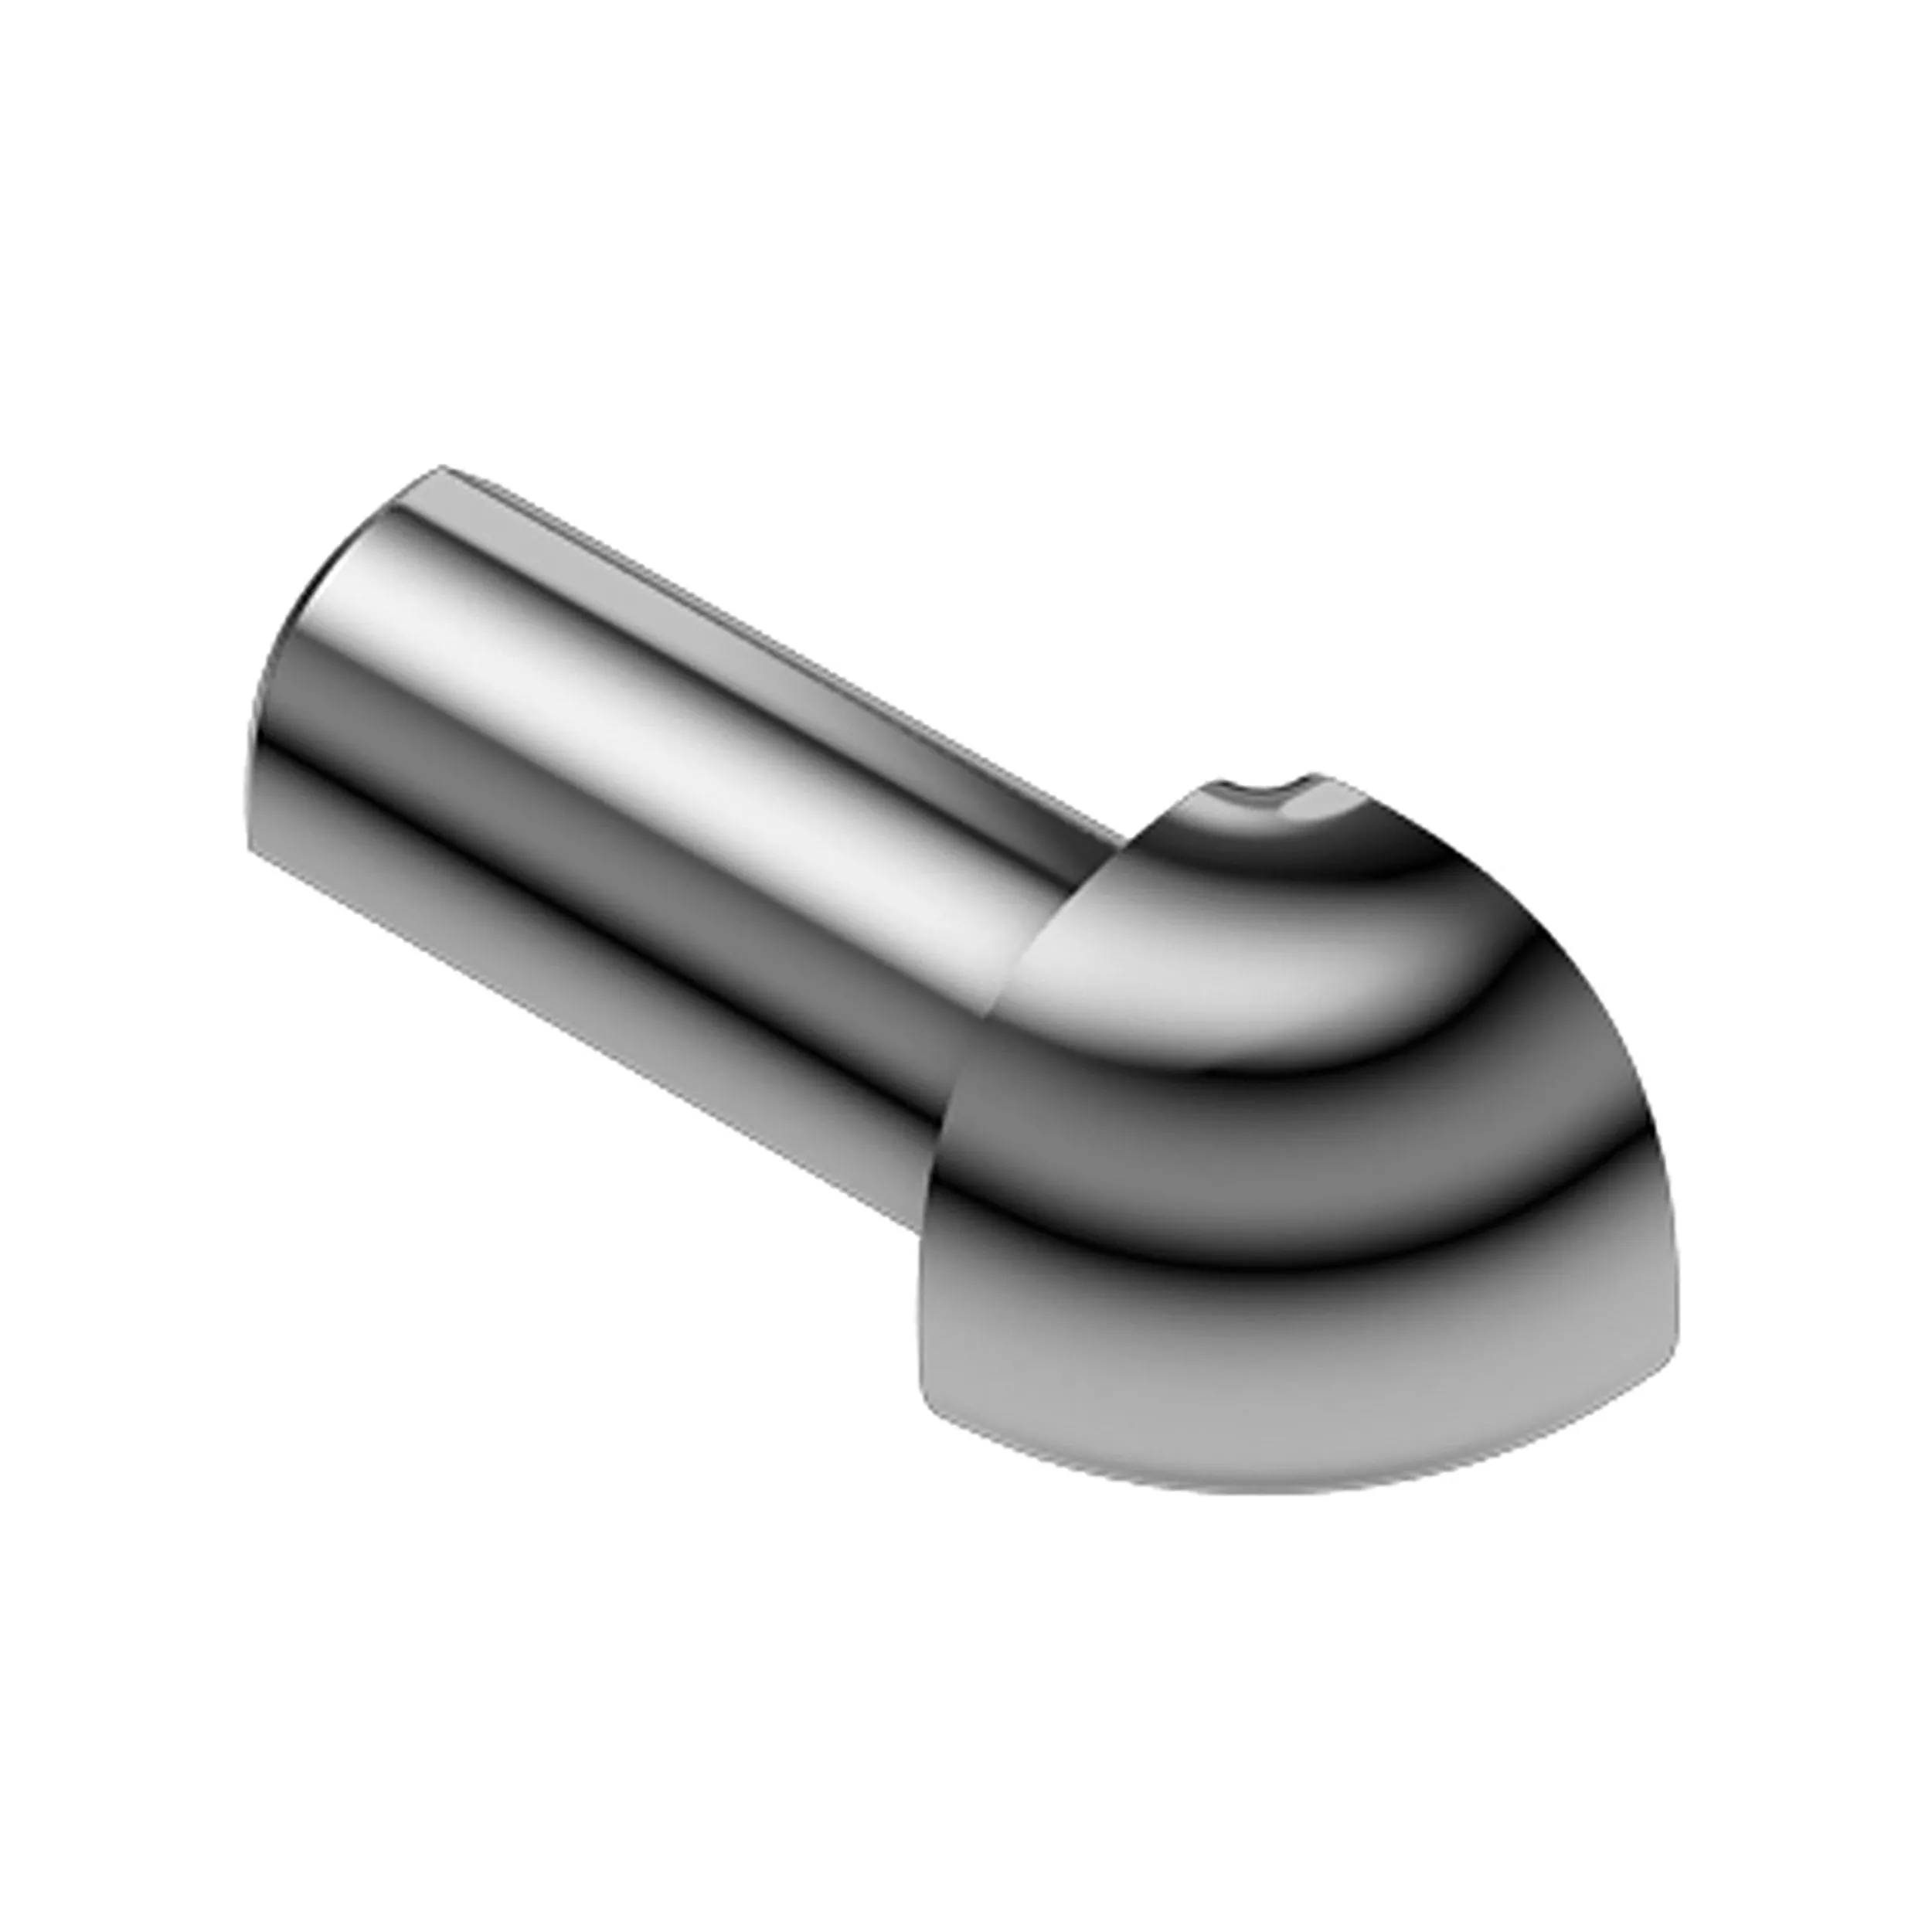 Schluter-Rondec Outside Corner for 3/8in. Polished Chrome Anodized Aluminum Rondec Profile